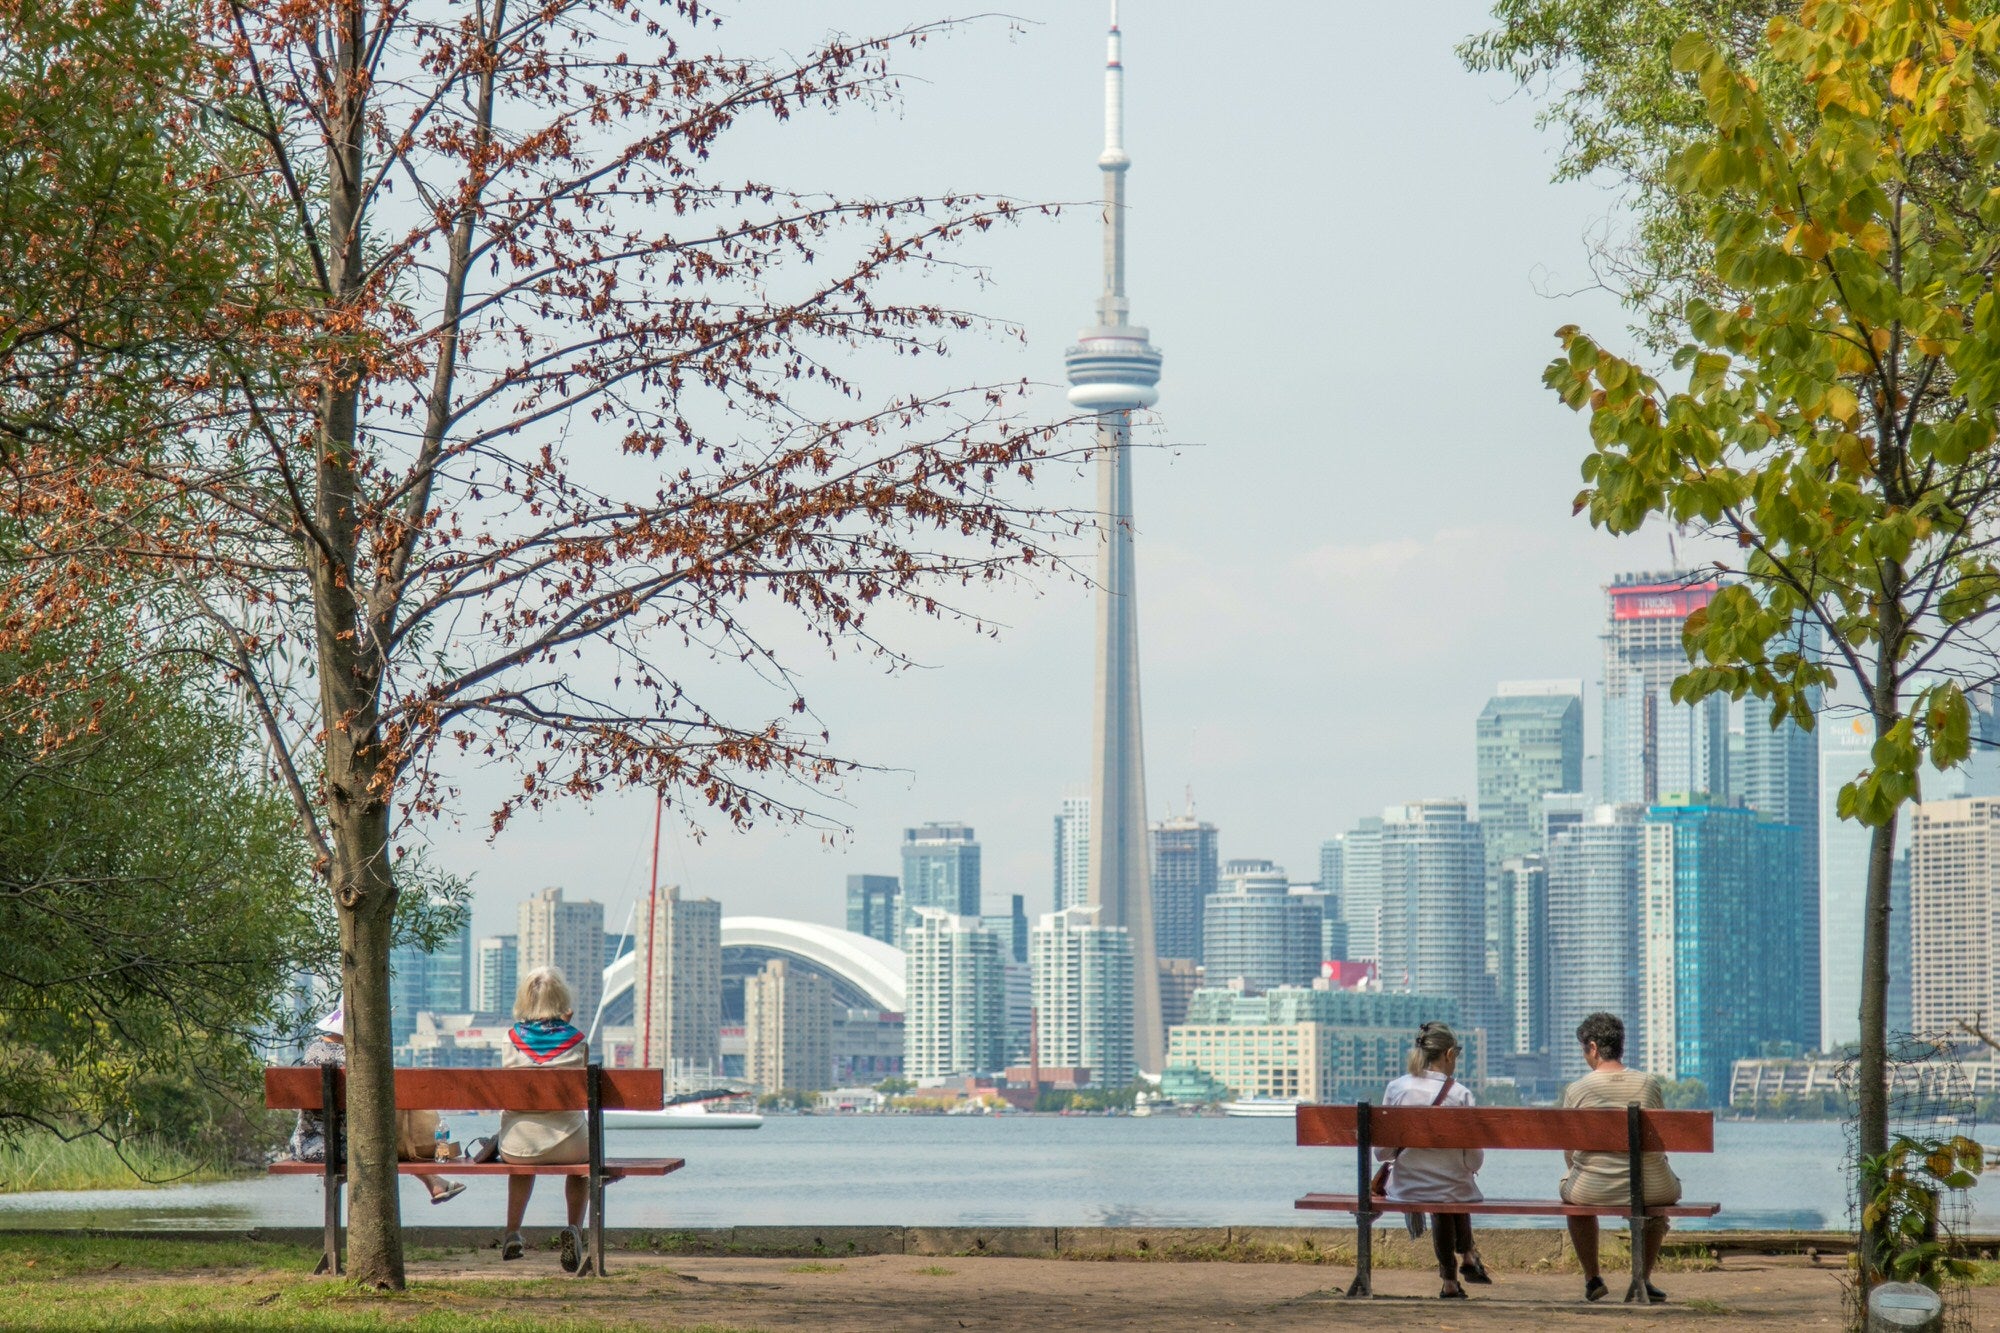 People sitting on benches on Toronto Islands, gazing at the Toronto skyline.